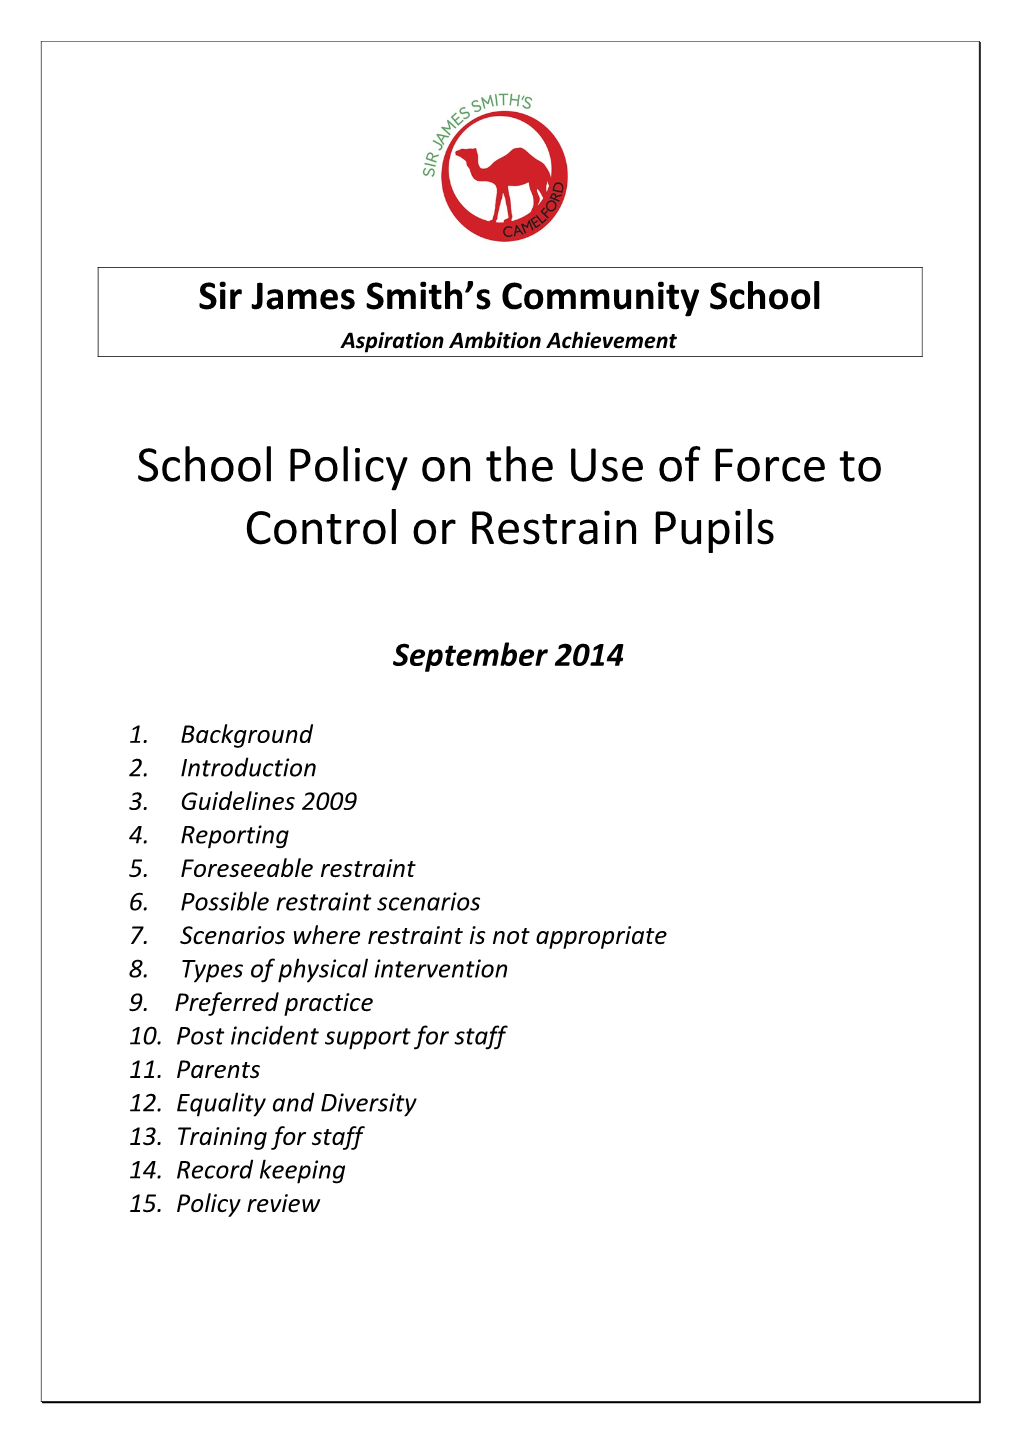 School Policy on the Use of Force to Control Or Restrain Children and Young People